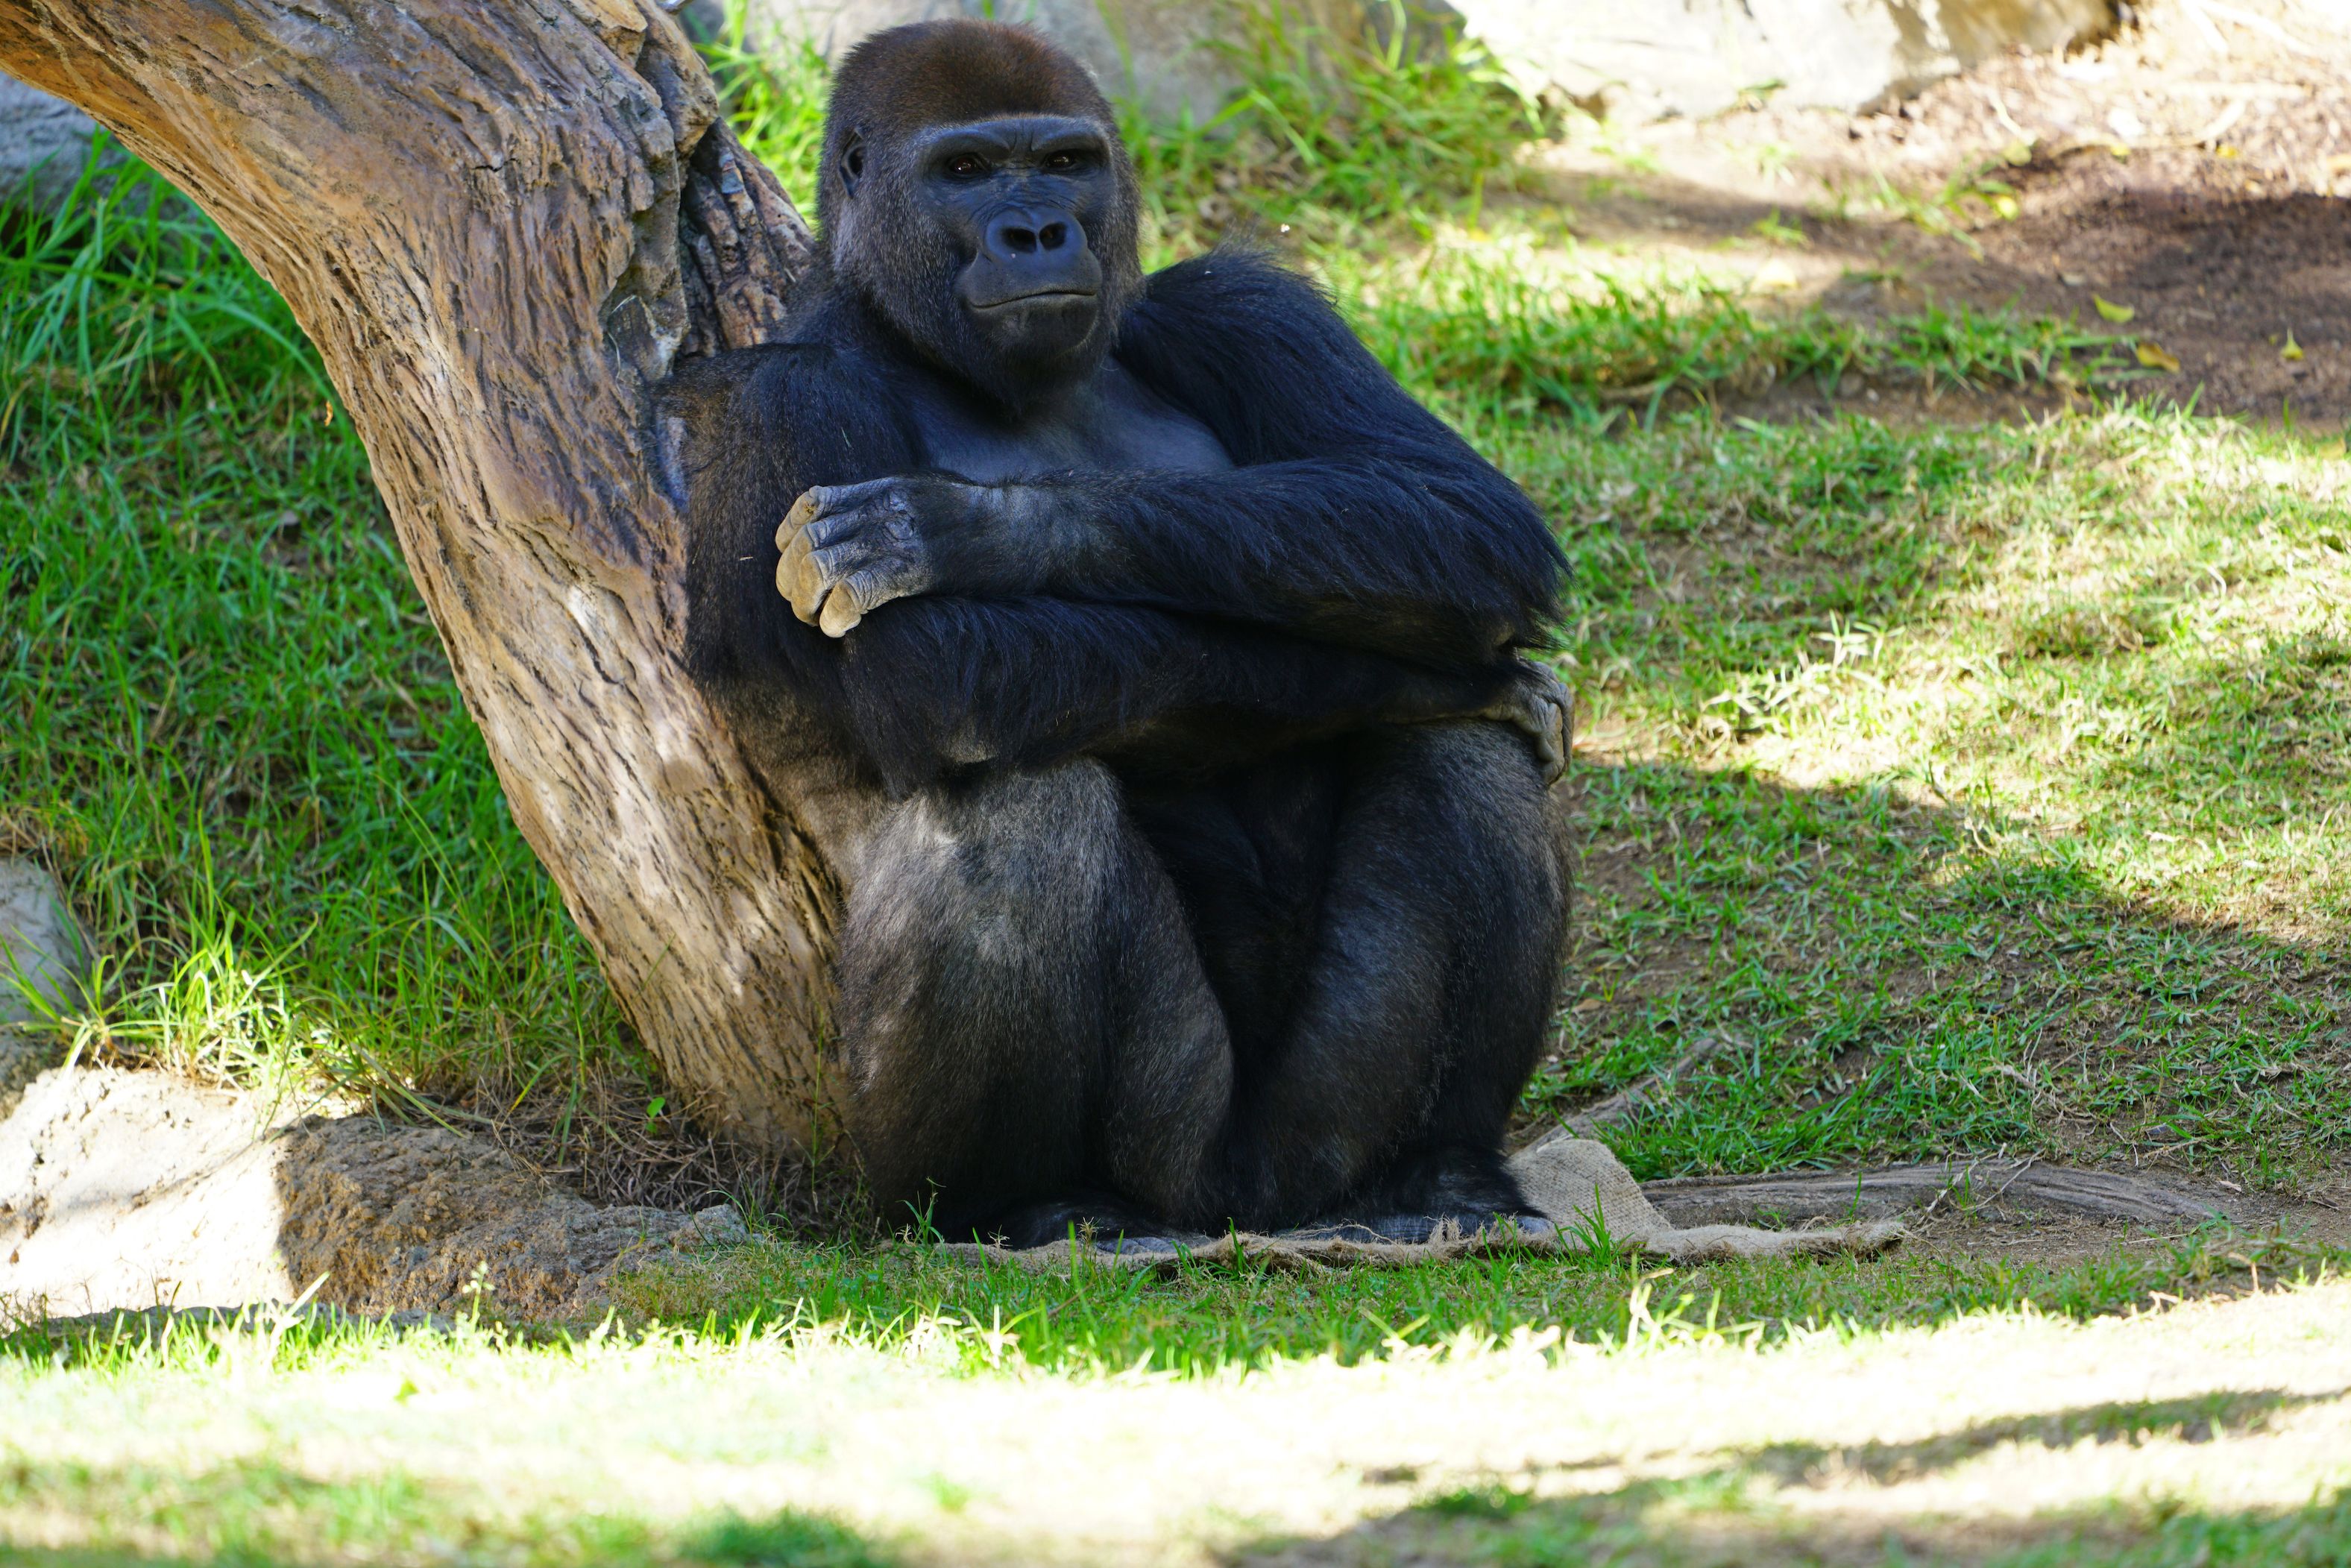 View of a Western gorilla at the San Diego Zoo Safari Park in San Diego, California. Image by EQRoy/Shutterstock. United States, 2020.